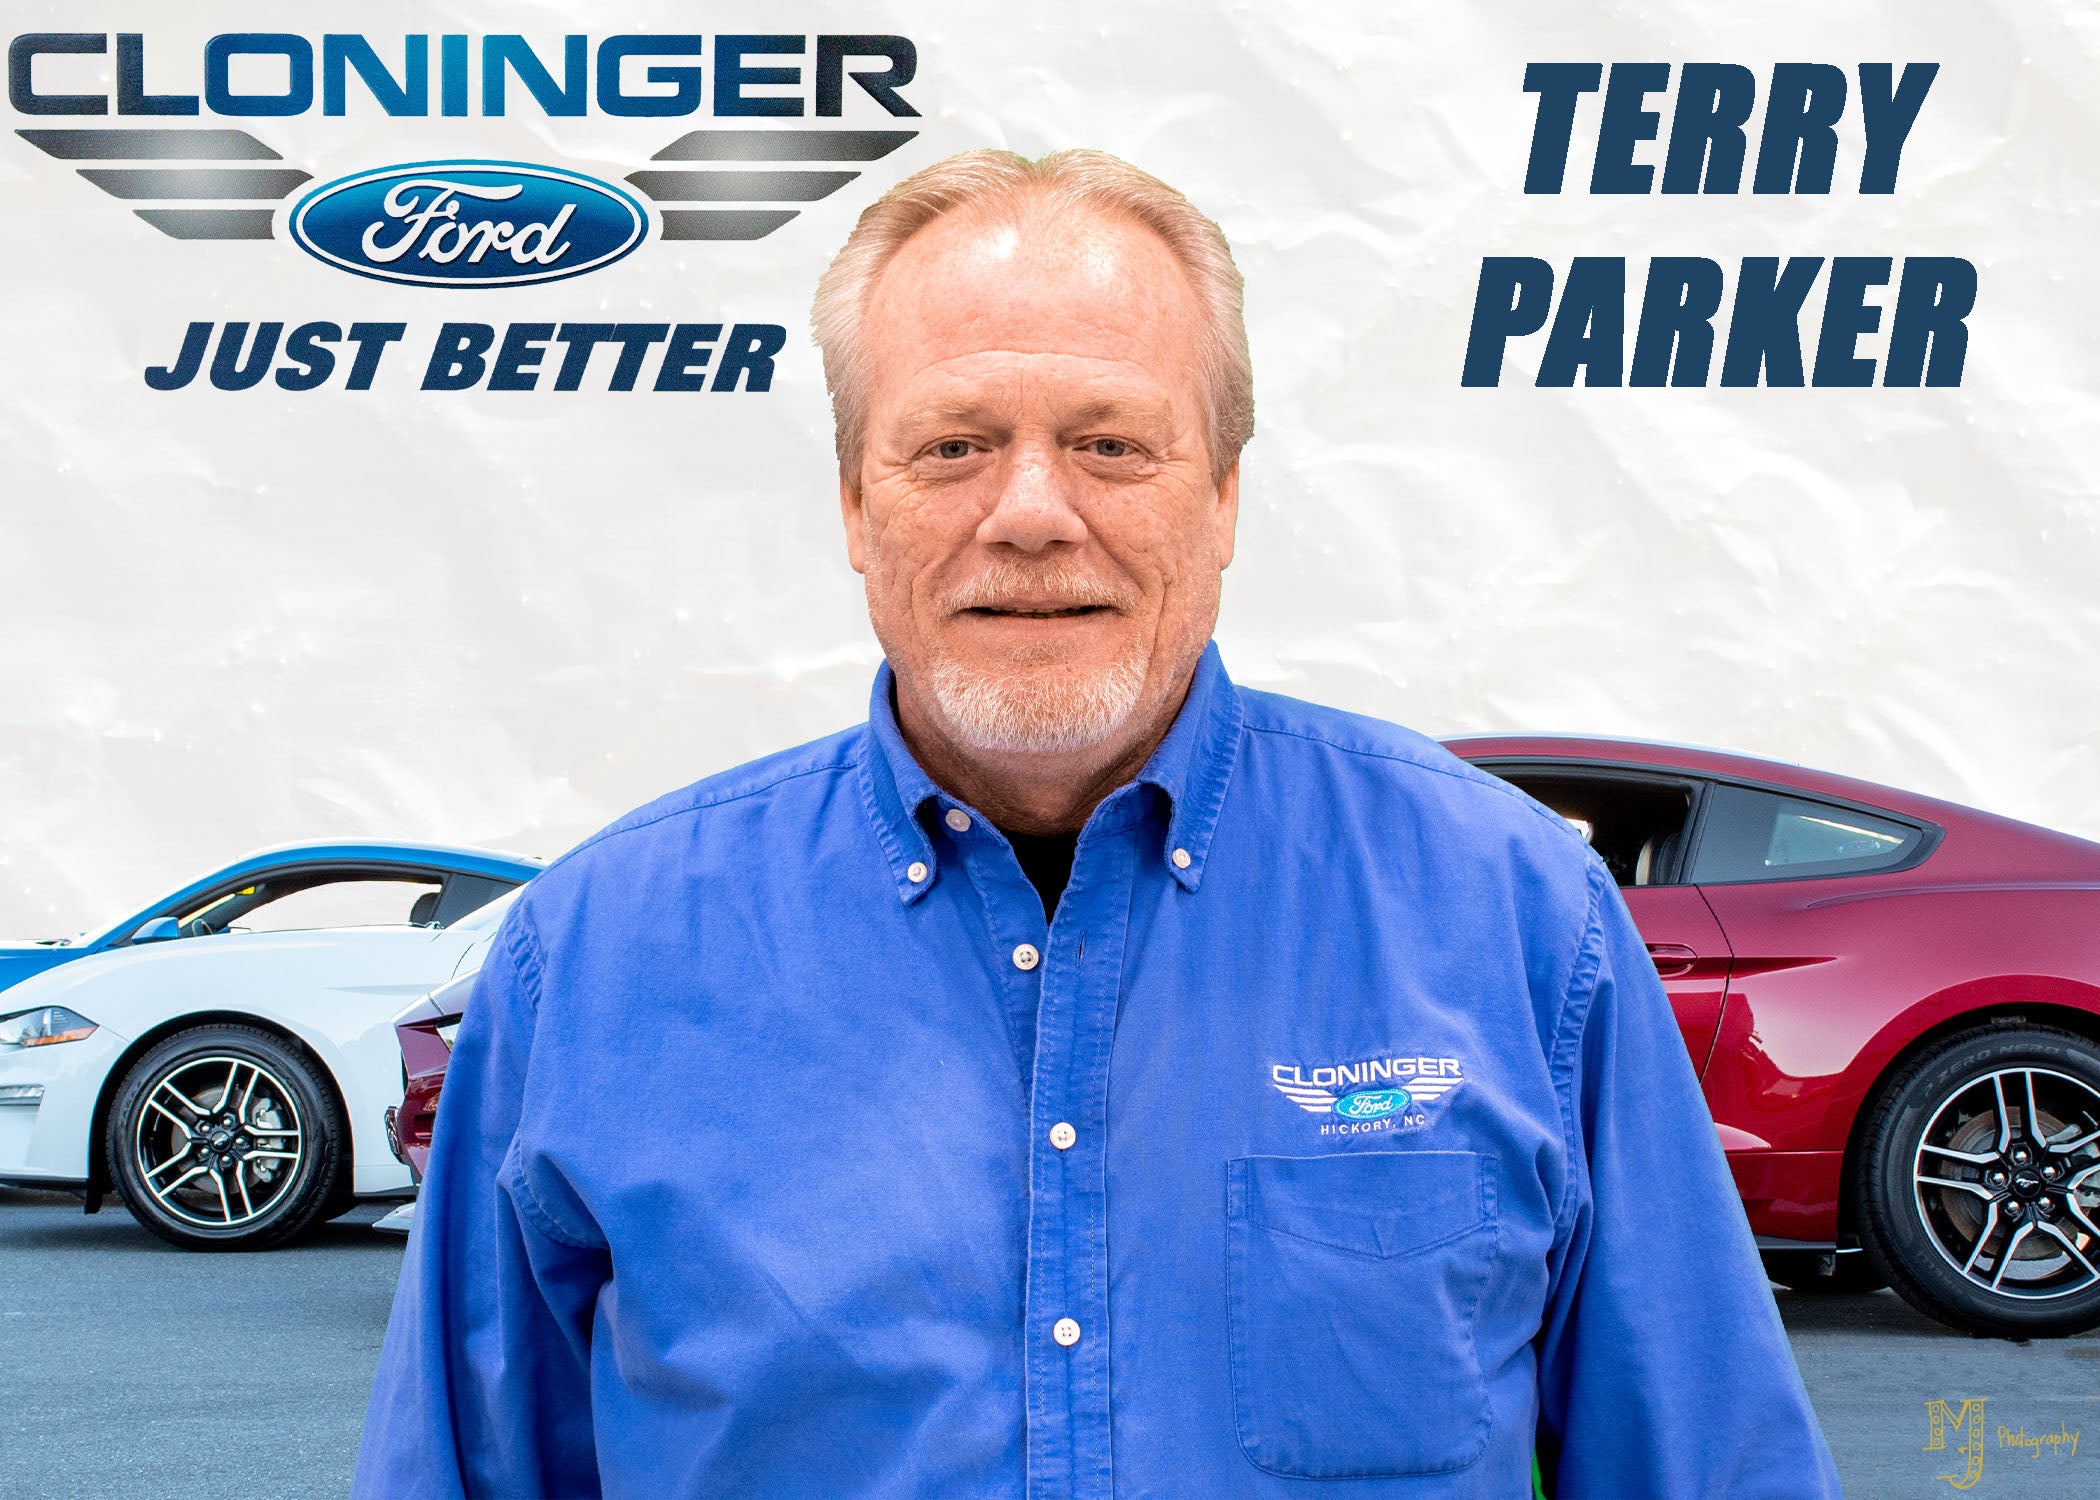 Terry Parker